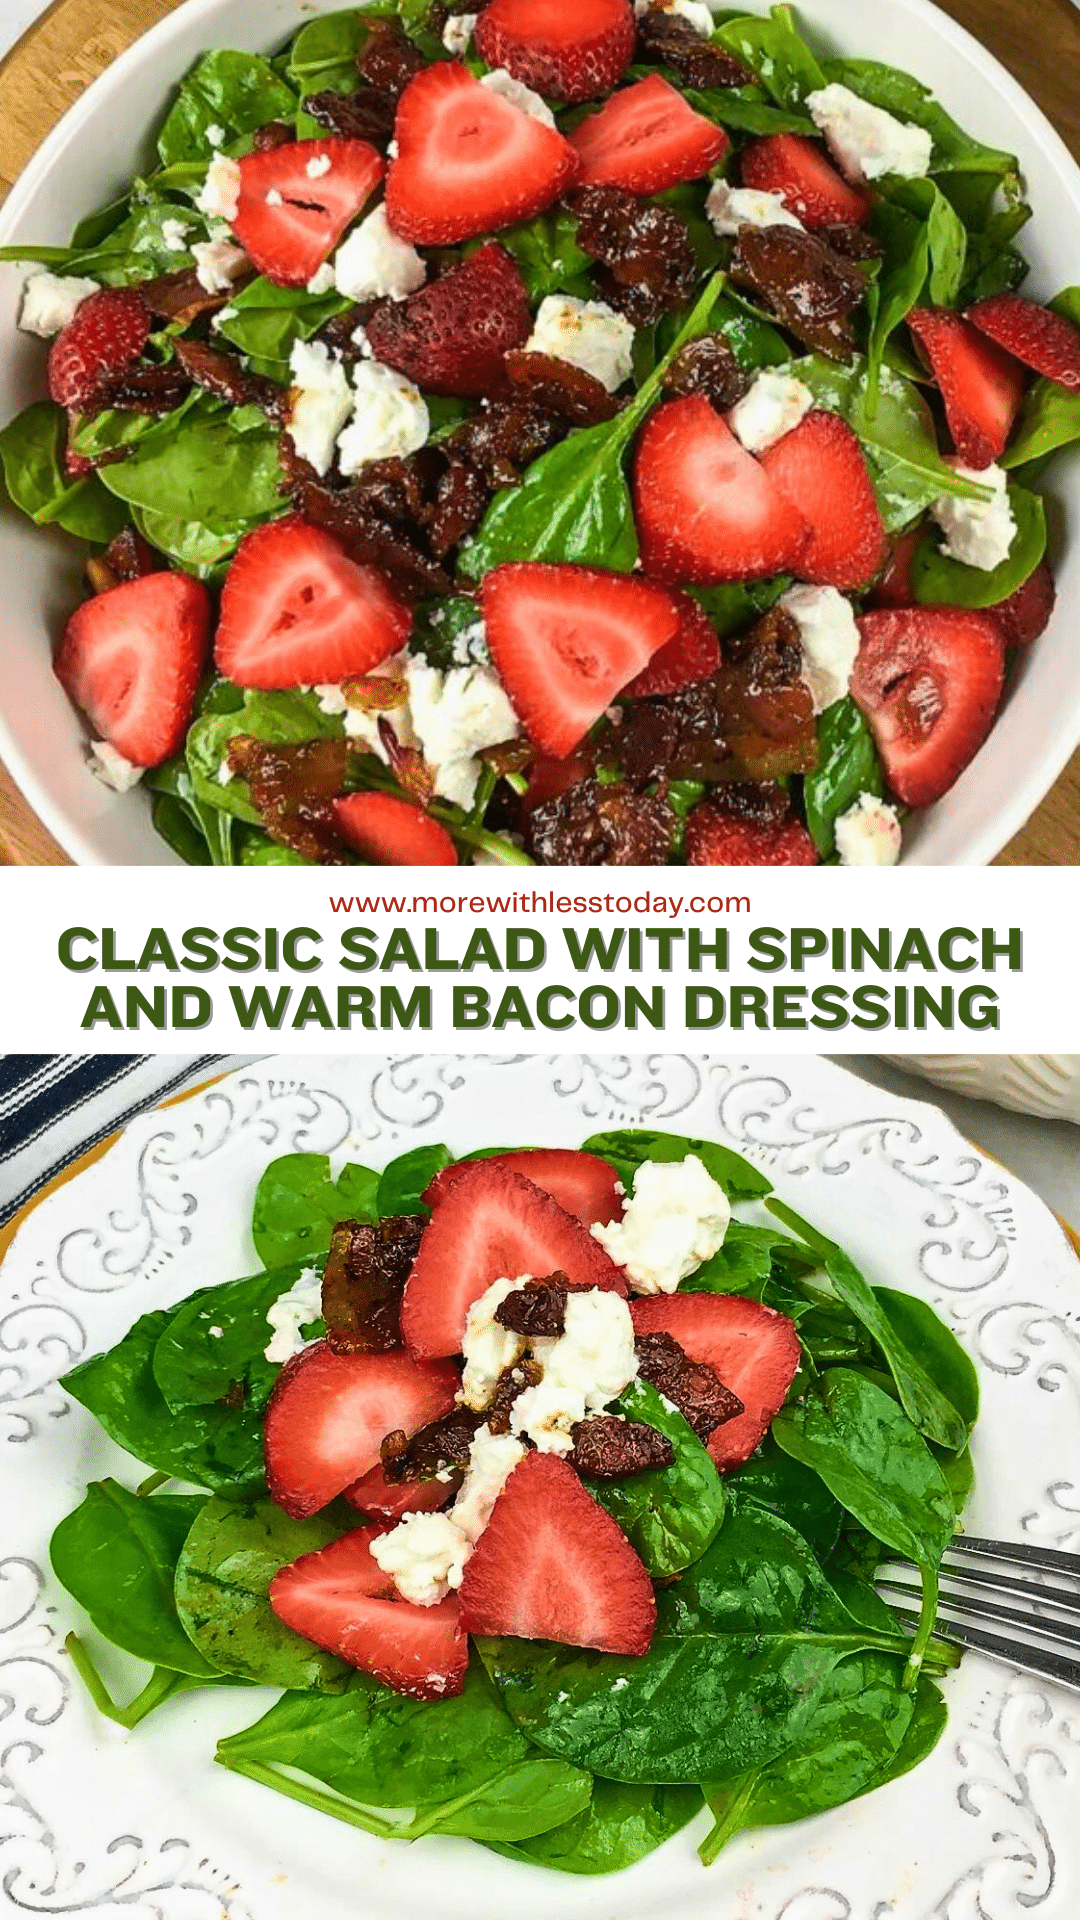 Classic Salad with Spinach and Warm Bacon Dressing served on a white bowl - PIN